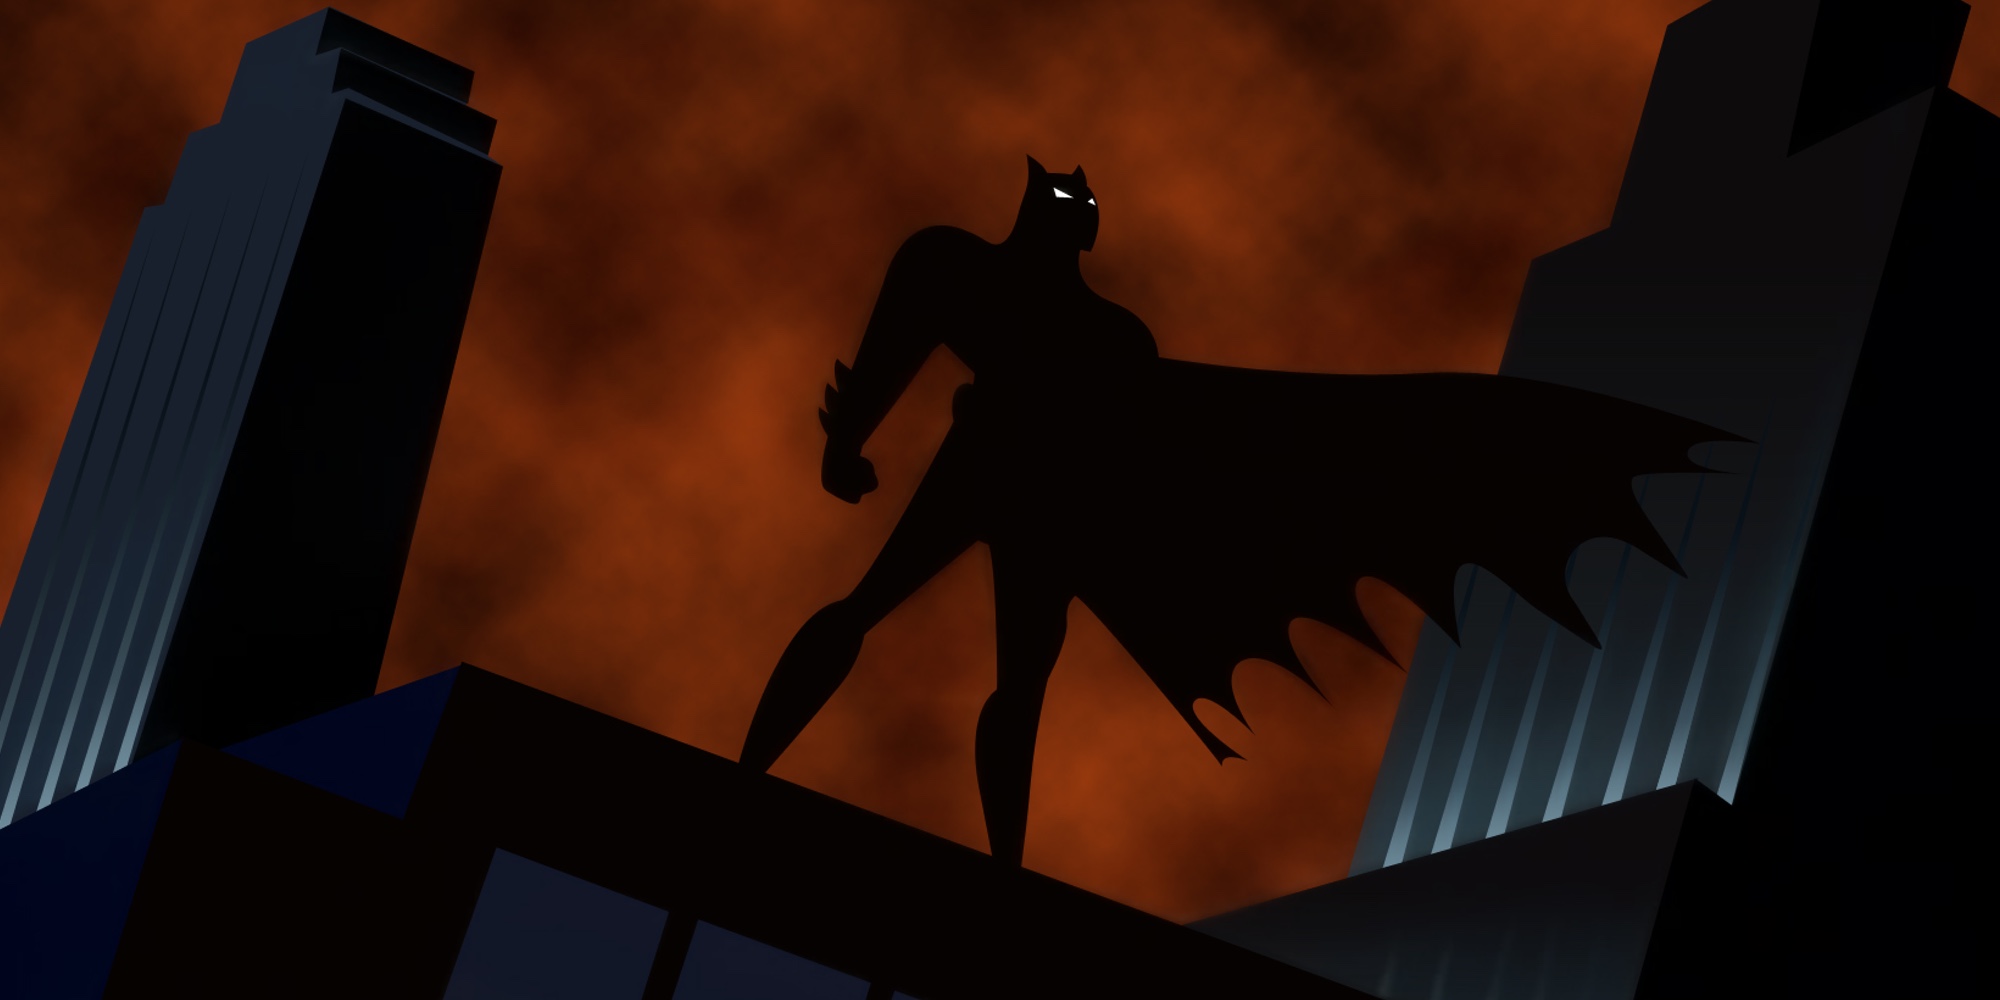 2. DC Shows Were Better. Batman- The Animated Series is arguably the best '90s animated superhero show. It was almost perfect. Widely believed to be the best Batman work to date. It started the trend of animated shows.